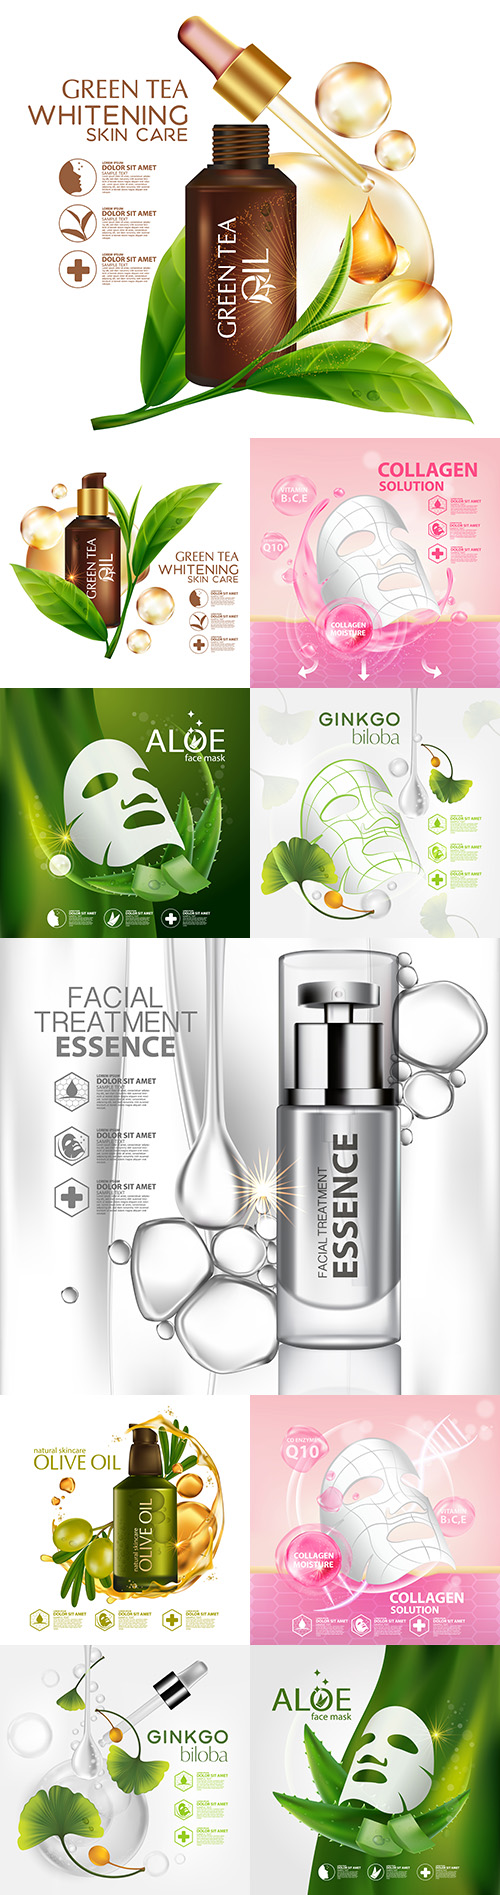 Skin care cosmetics with natural ingredients is realistic illustration 4